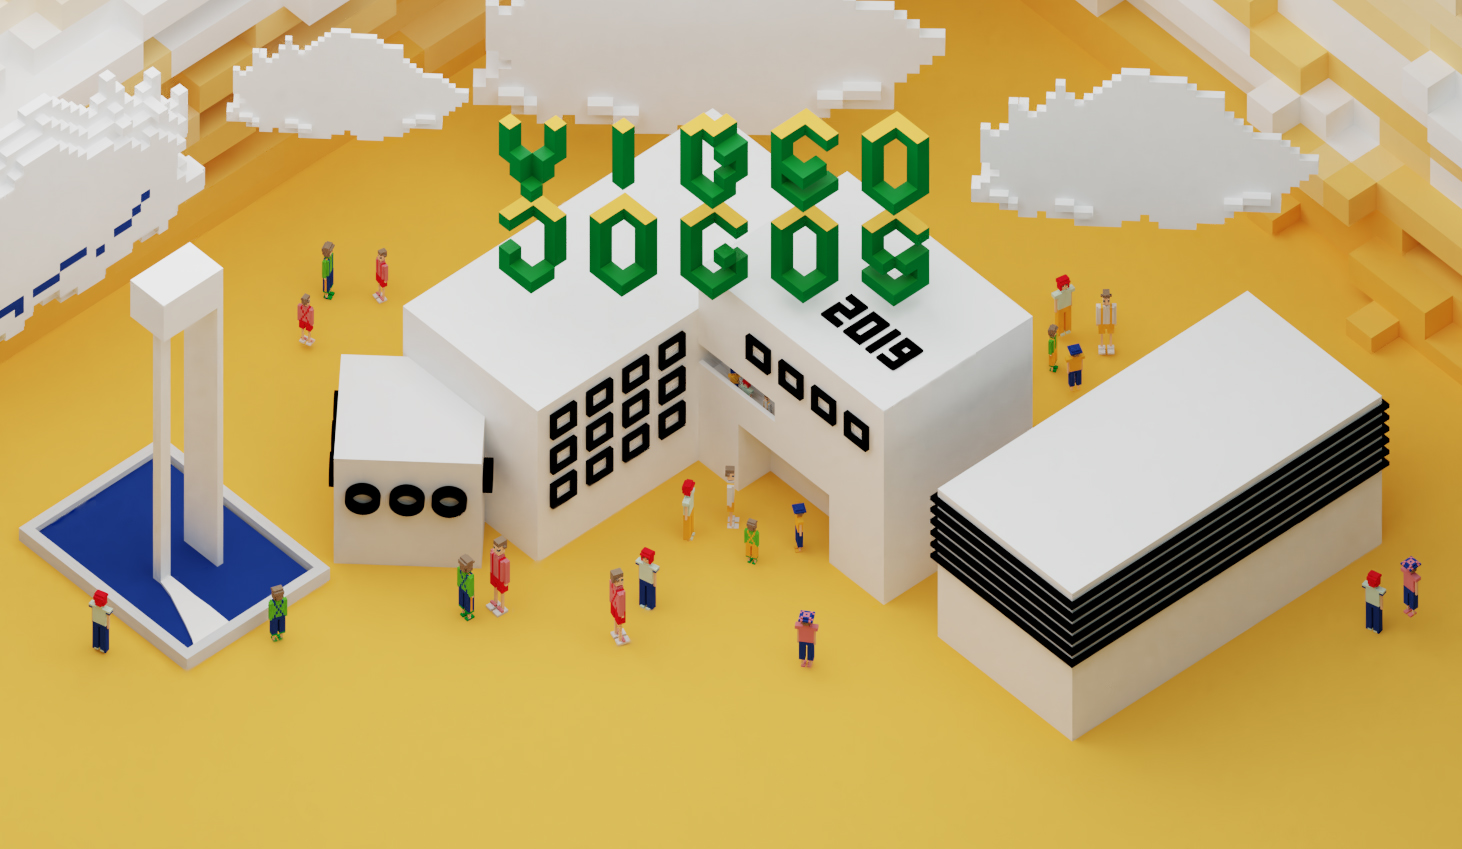 Artwork for Videojogos 2019. A non-realistic computer-generated image featuring the title of the conference above a representation of the venue, located in University of Aveiro